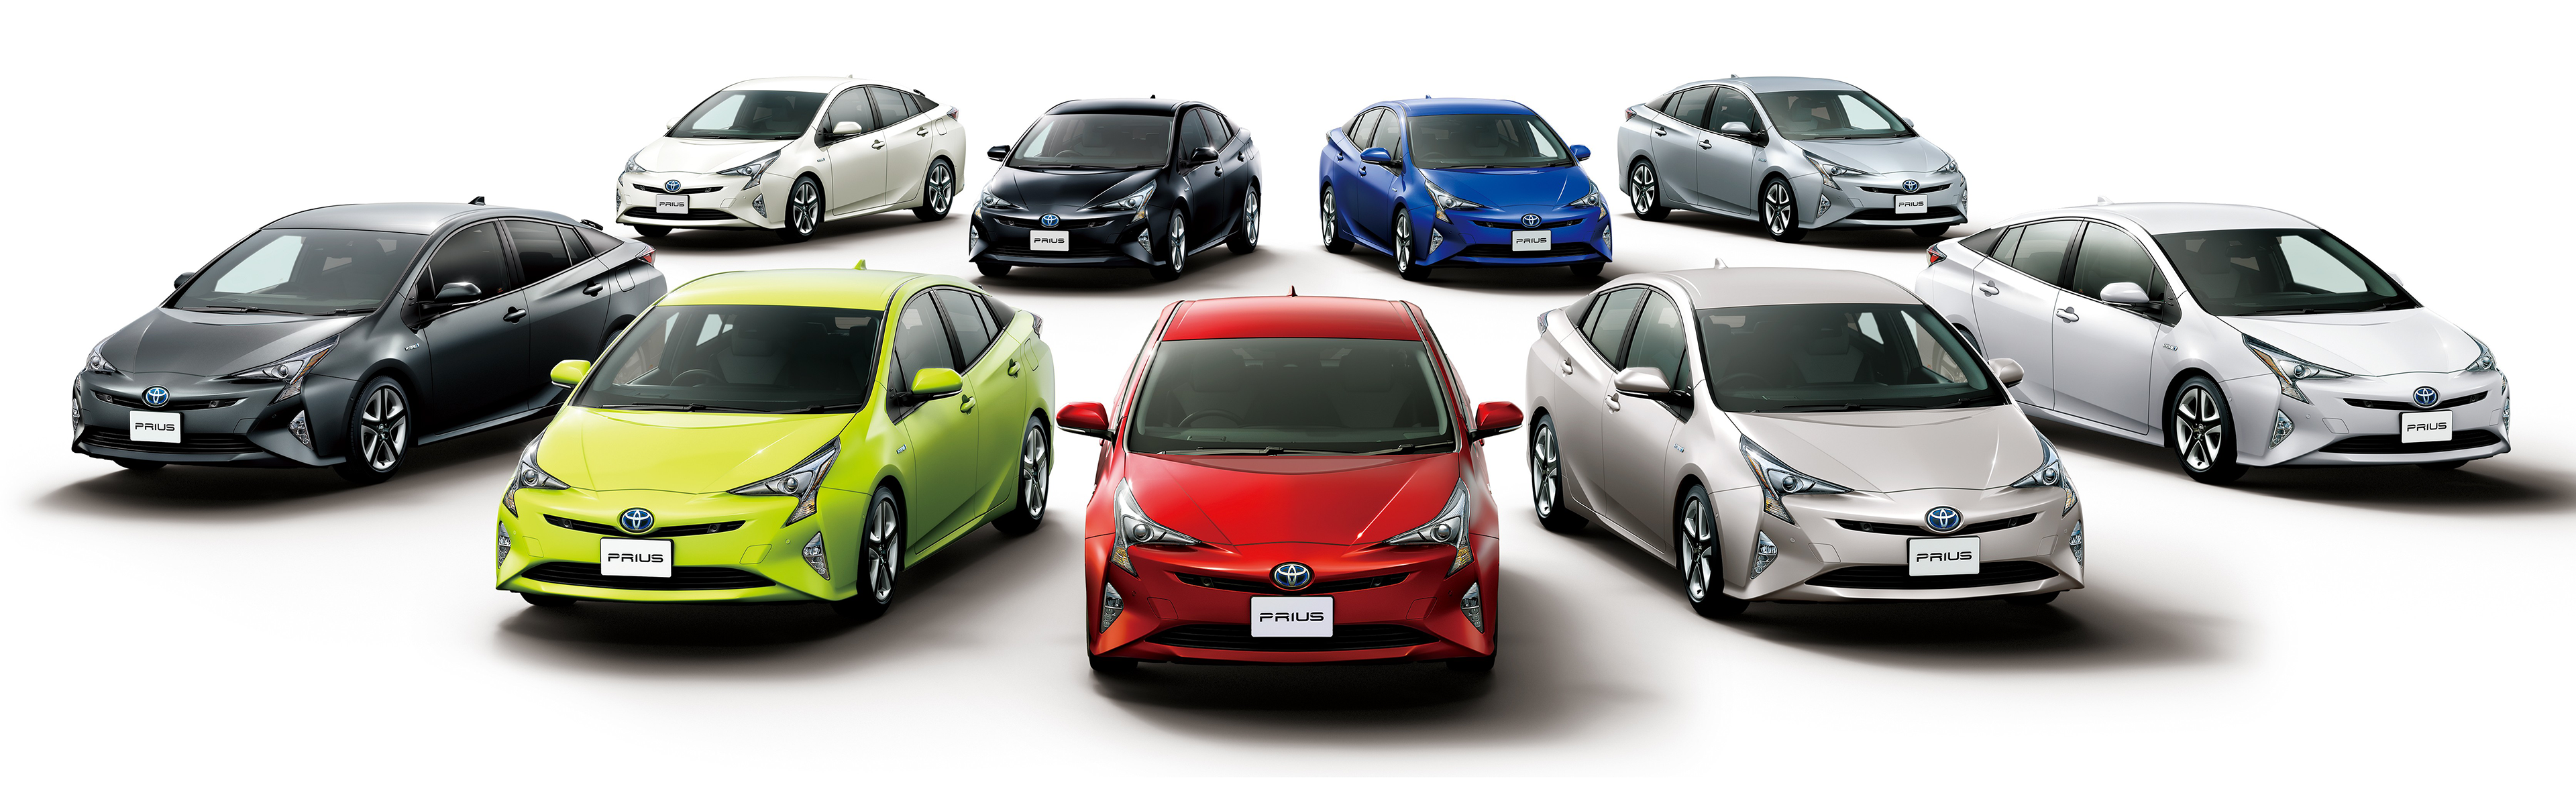 General 3840x1200 Toyota Prius car vehicle electric car dual monitors multiple display simple background red cars yellow cars silver cars blue cars black cars white cars white background